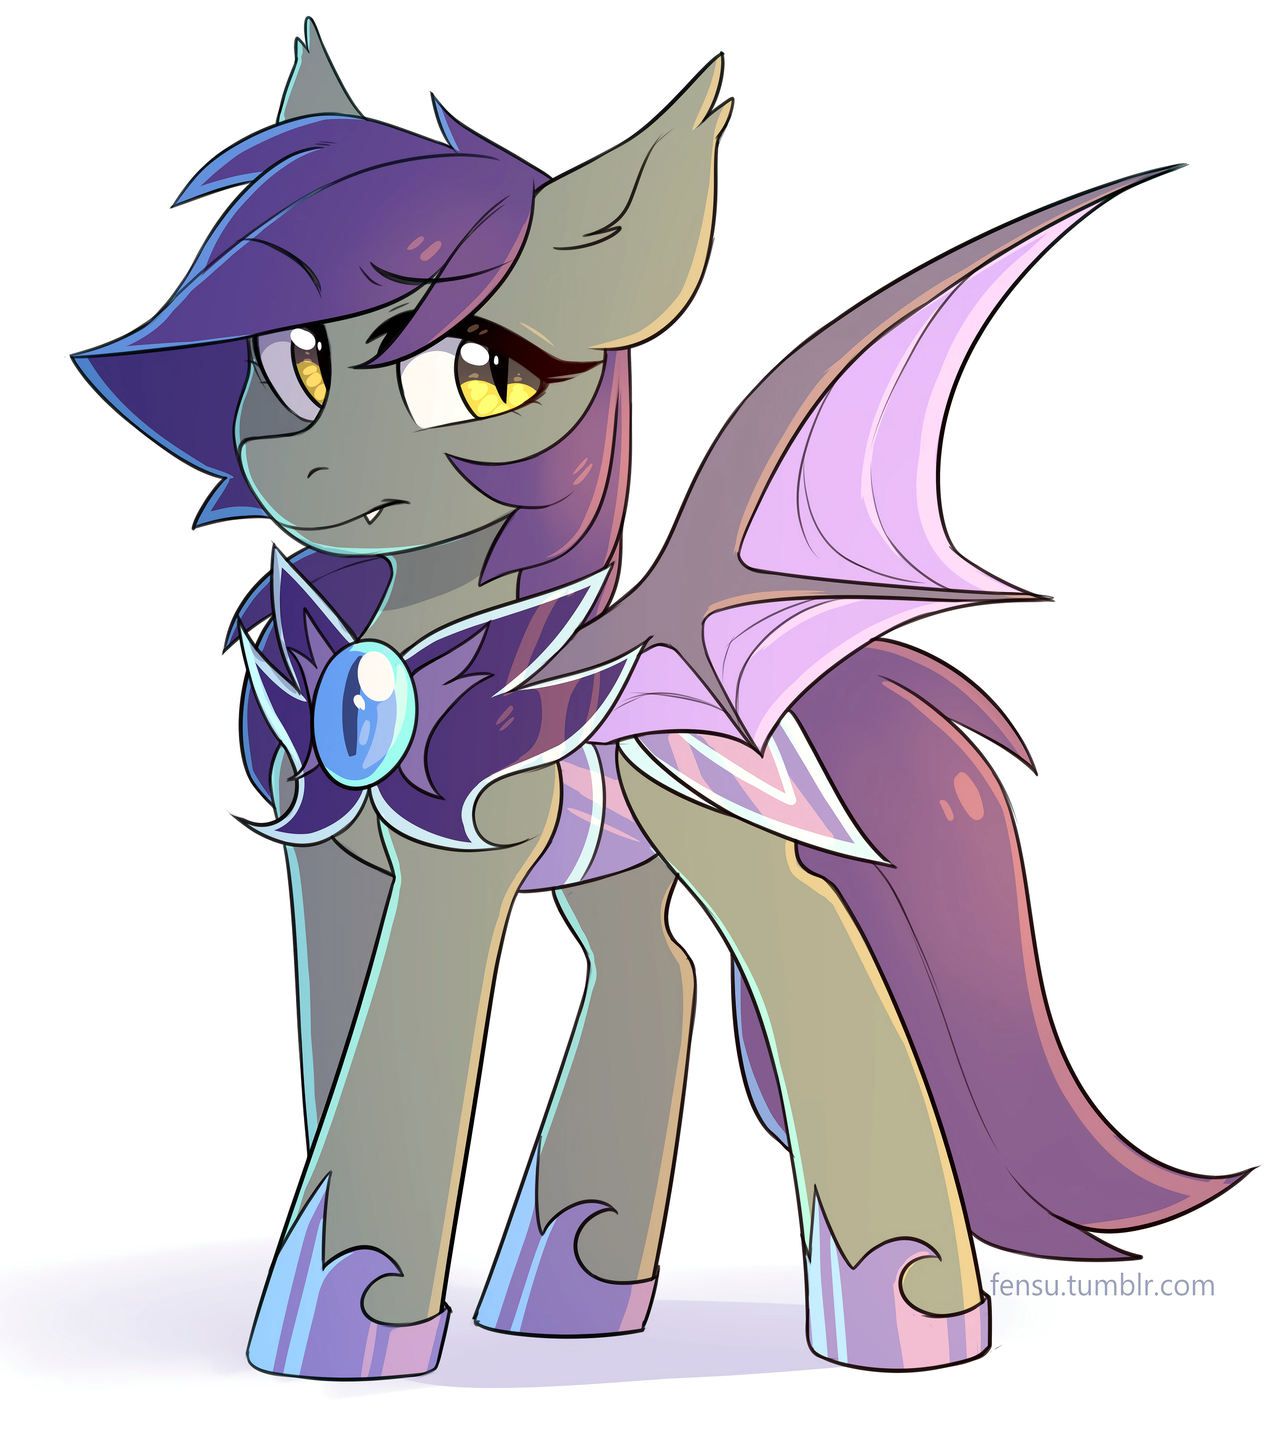 [fensu] collection 1 [MLP] (adjusted) 146